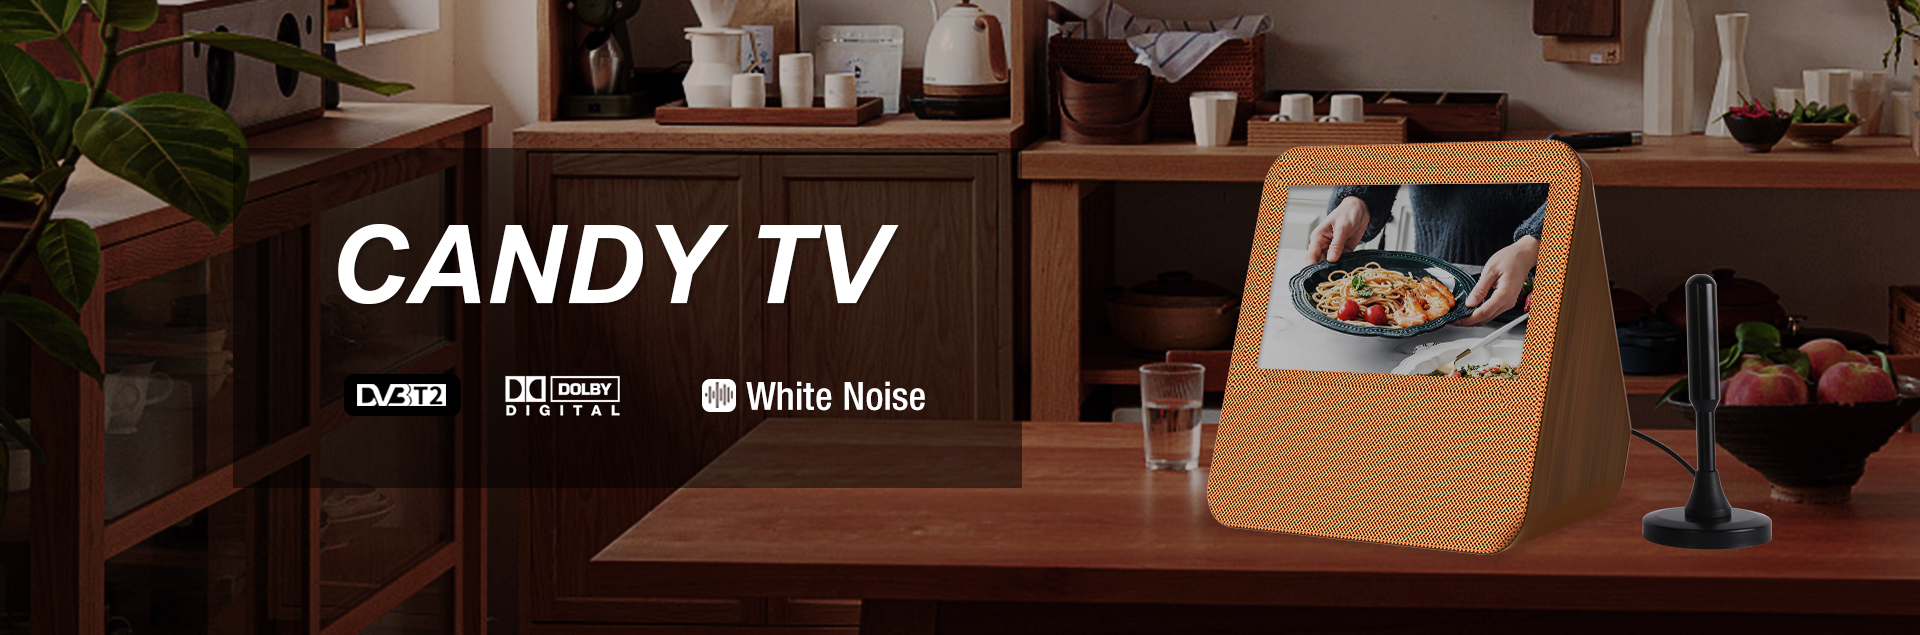 Candy TV with White Noise